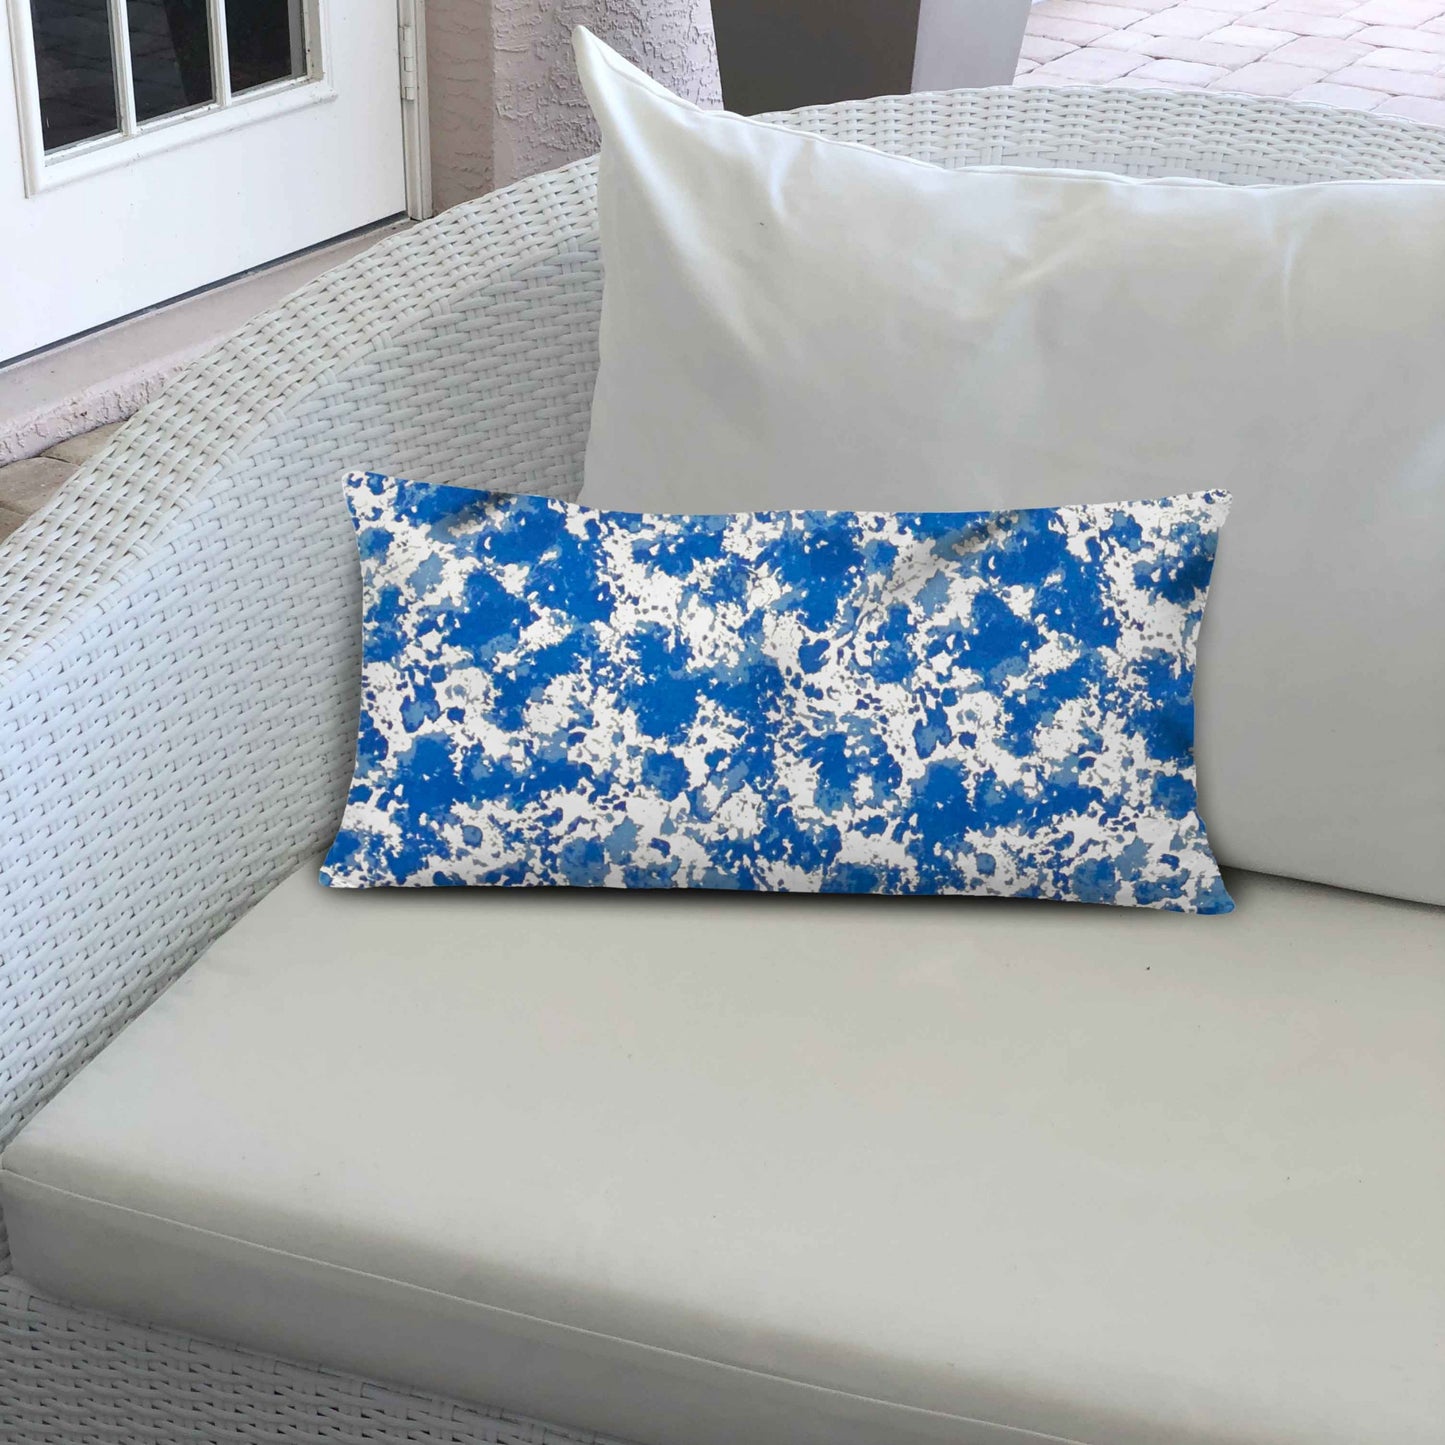 14" X 24" Blue And White Zippered Coastal Lumbar Indoor Outdoor Pillow Cover